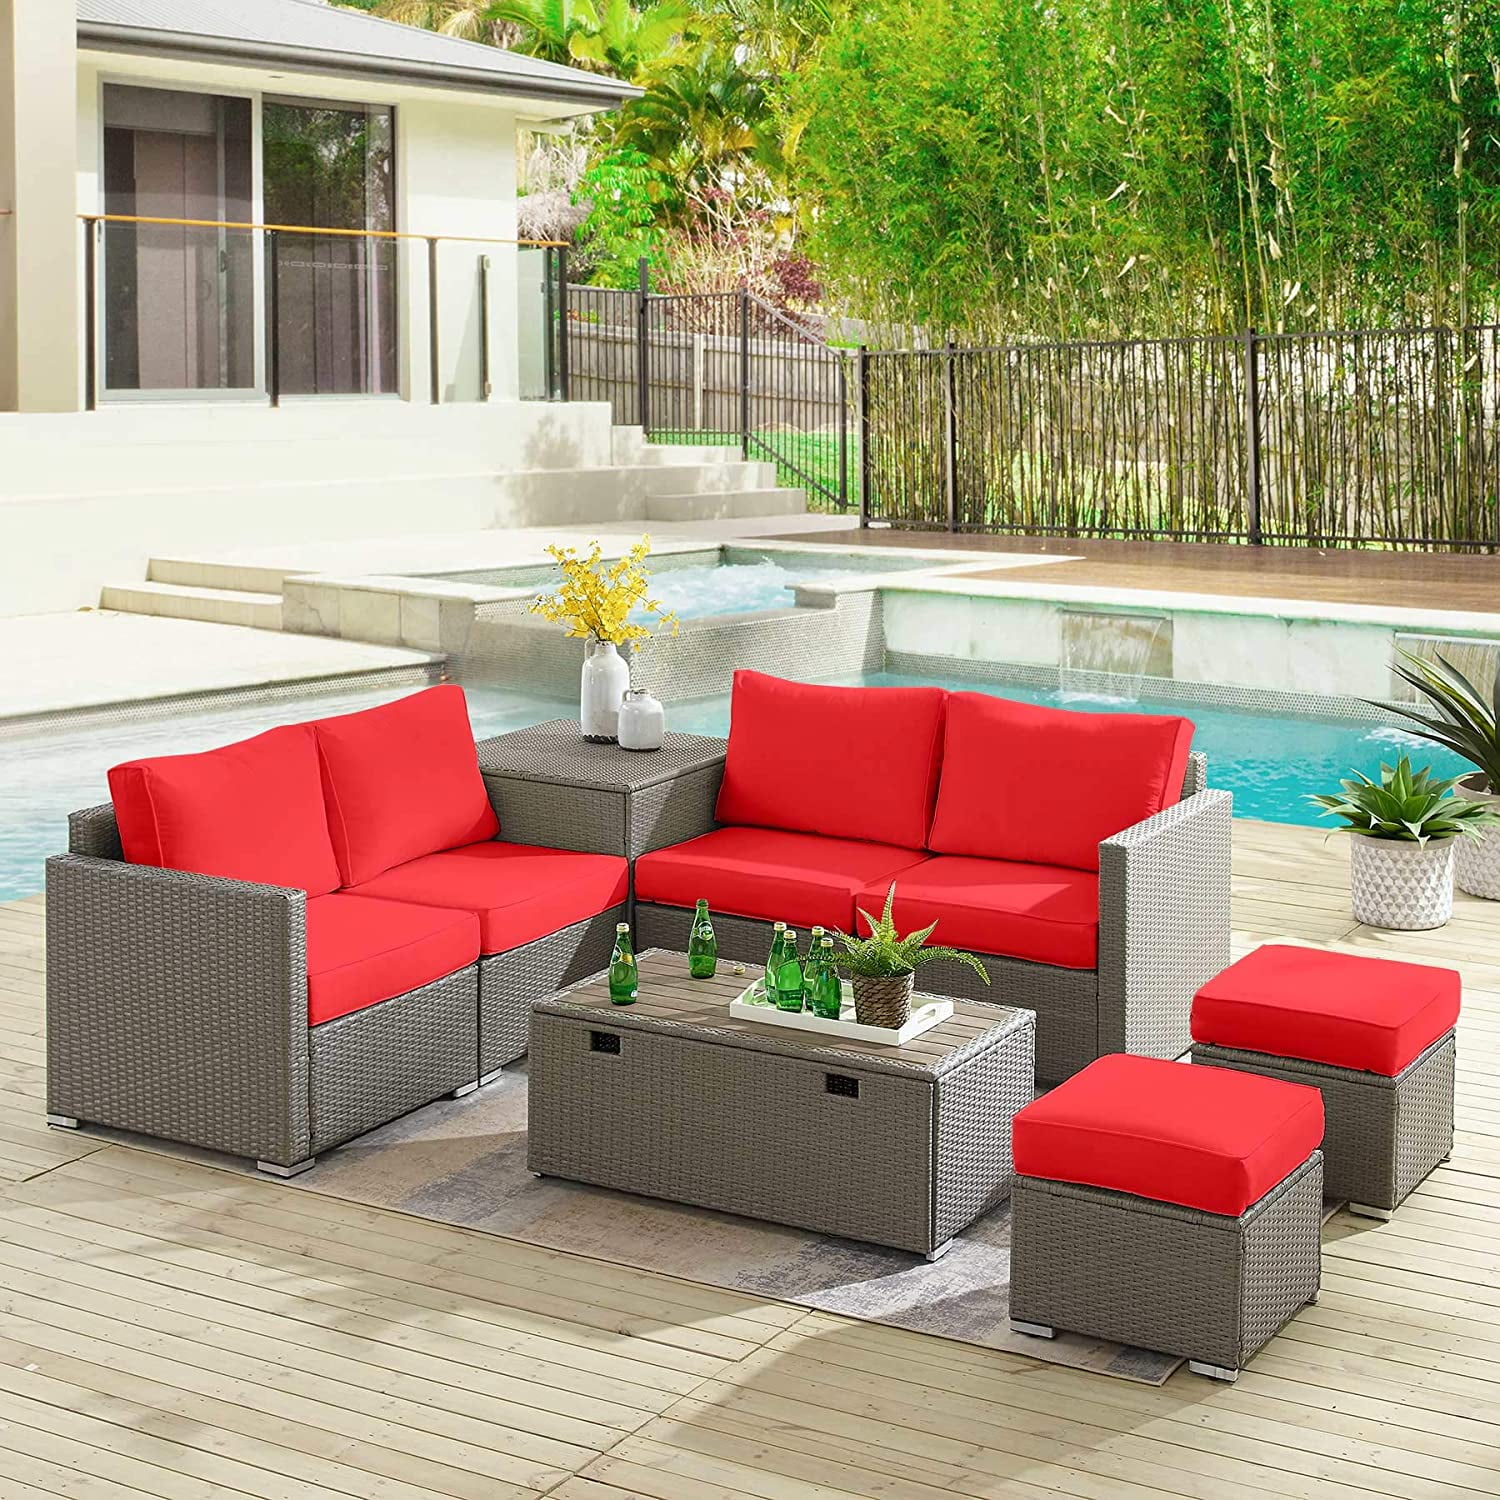 Tribesigns 8 Pieces Patio Furniture Set, Long Patio Furniture Cushions